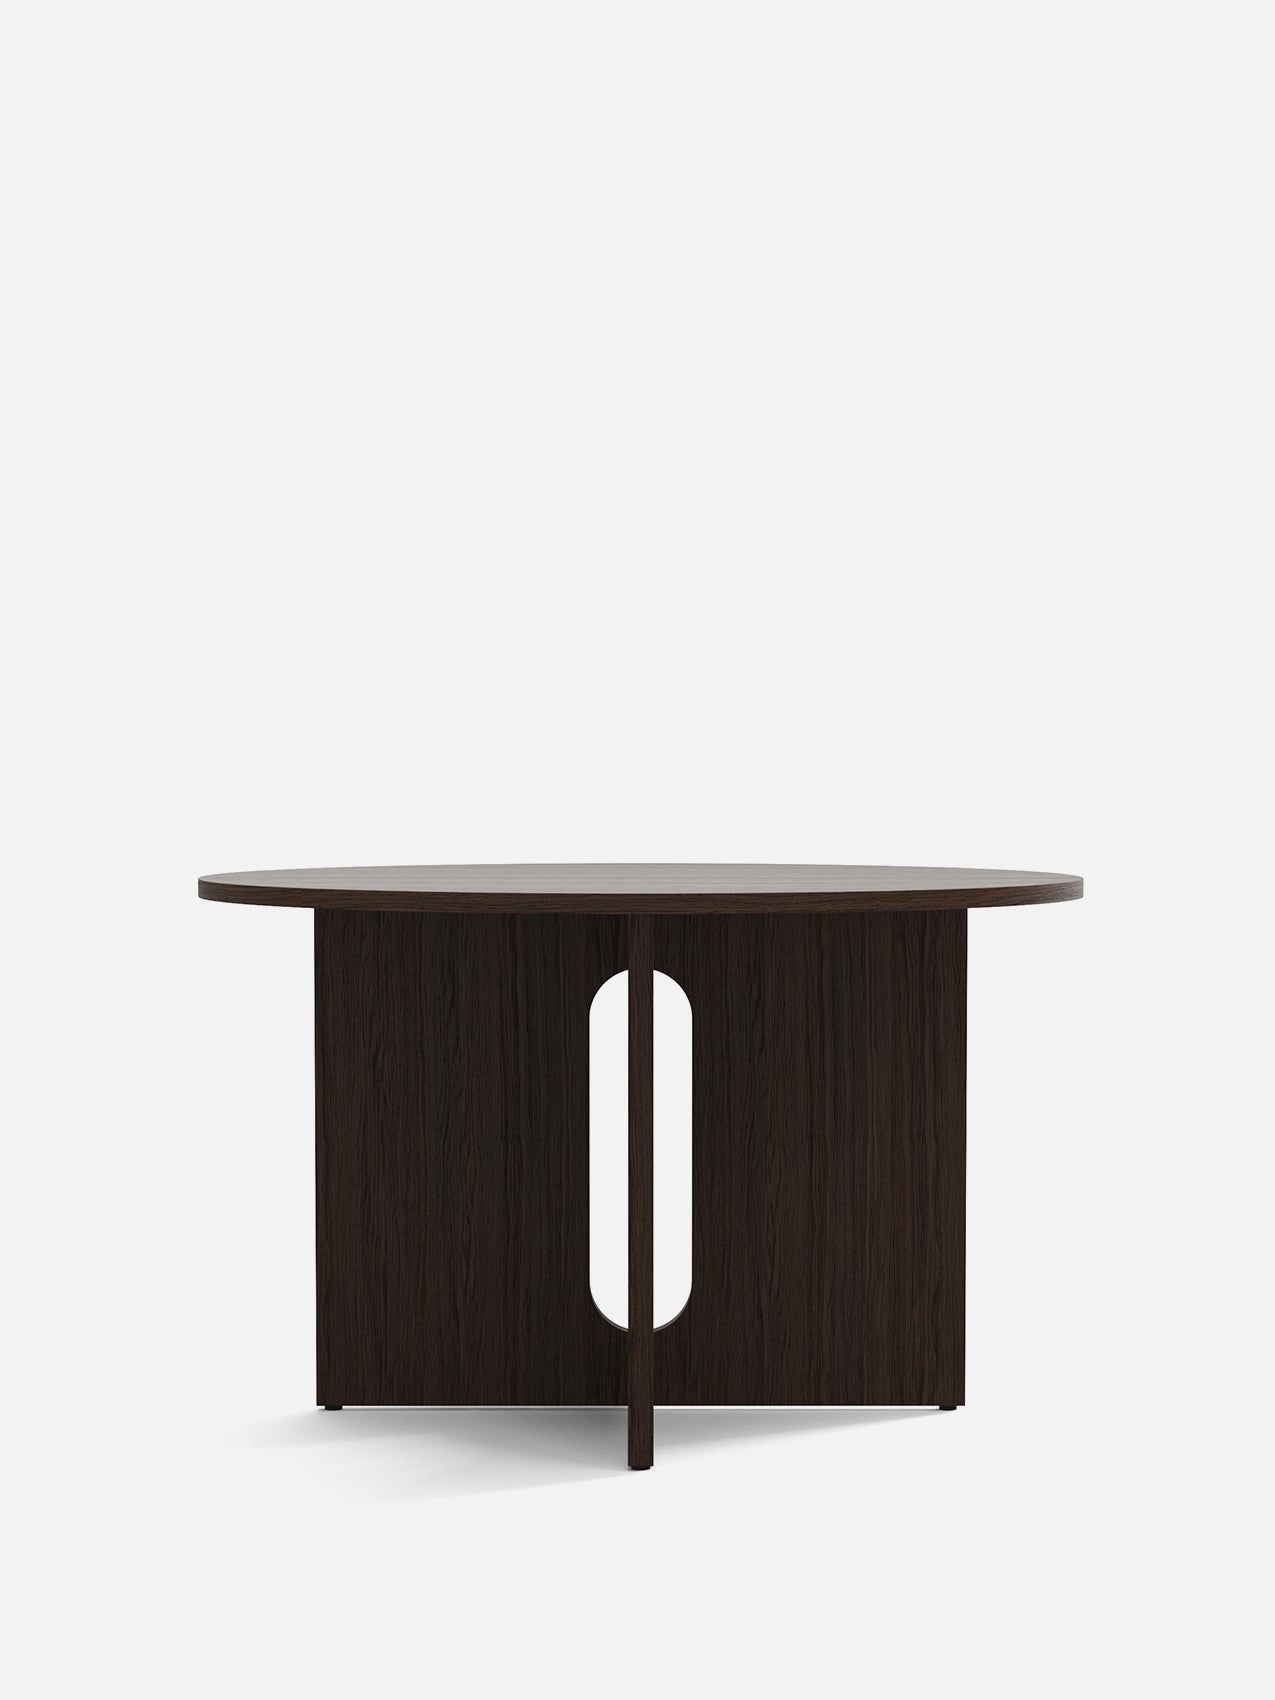 Androgyne Dining Table-Dining Table-Danielle Siggerud-Dining Height (47in)/Dark Stained Oak-Round - Dark Stained Oak-menu-minimalist-modern-danish-design-home-decor